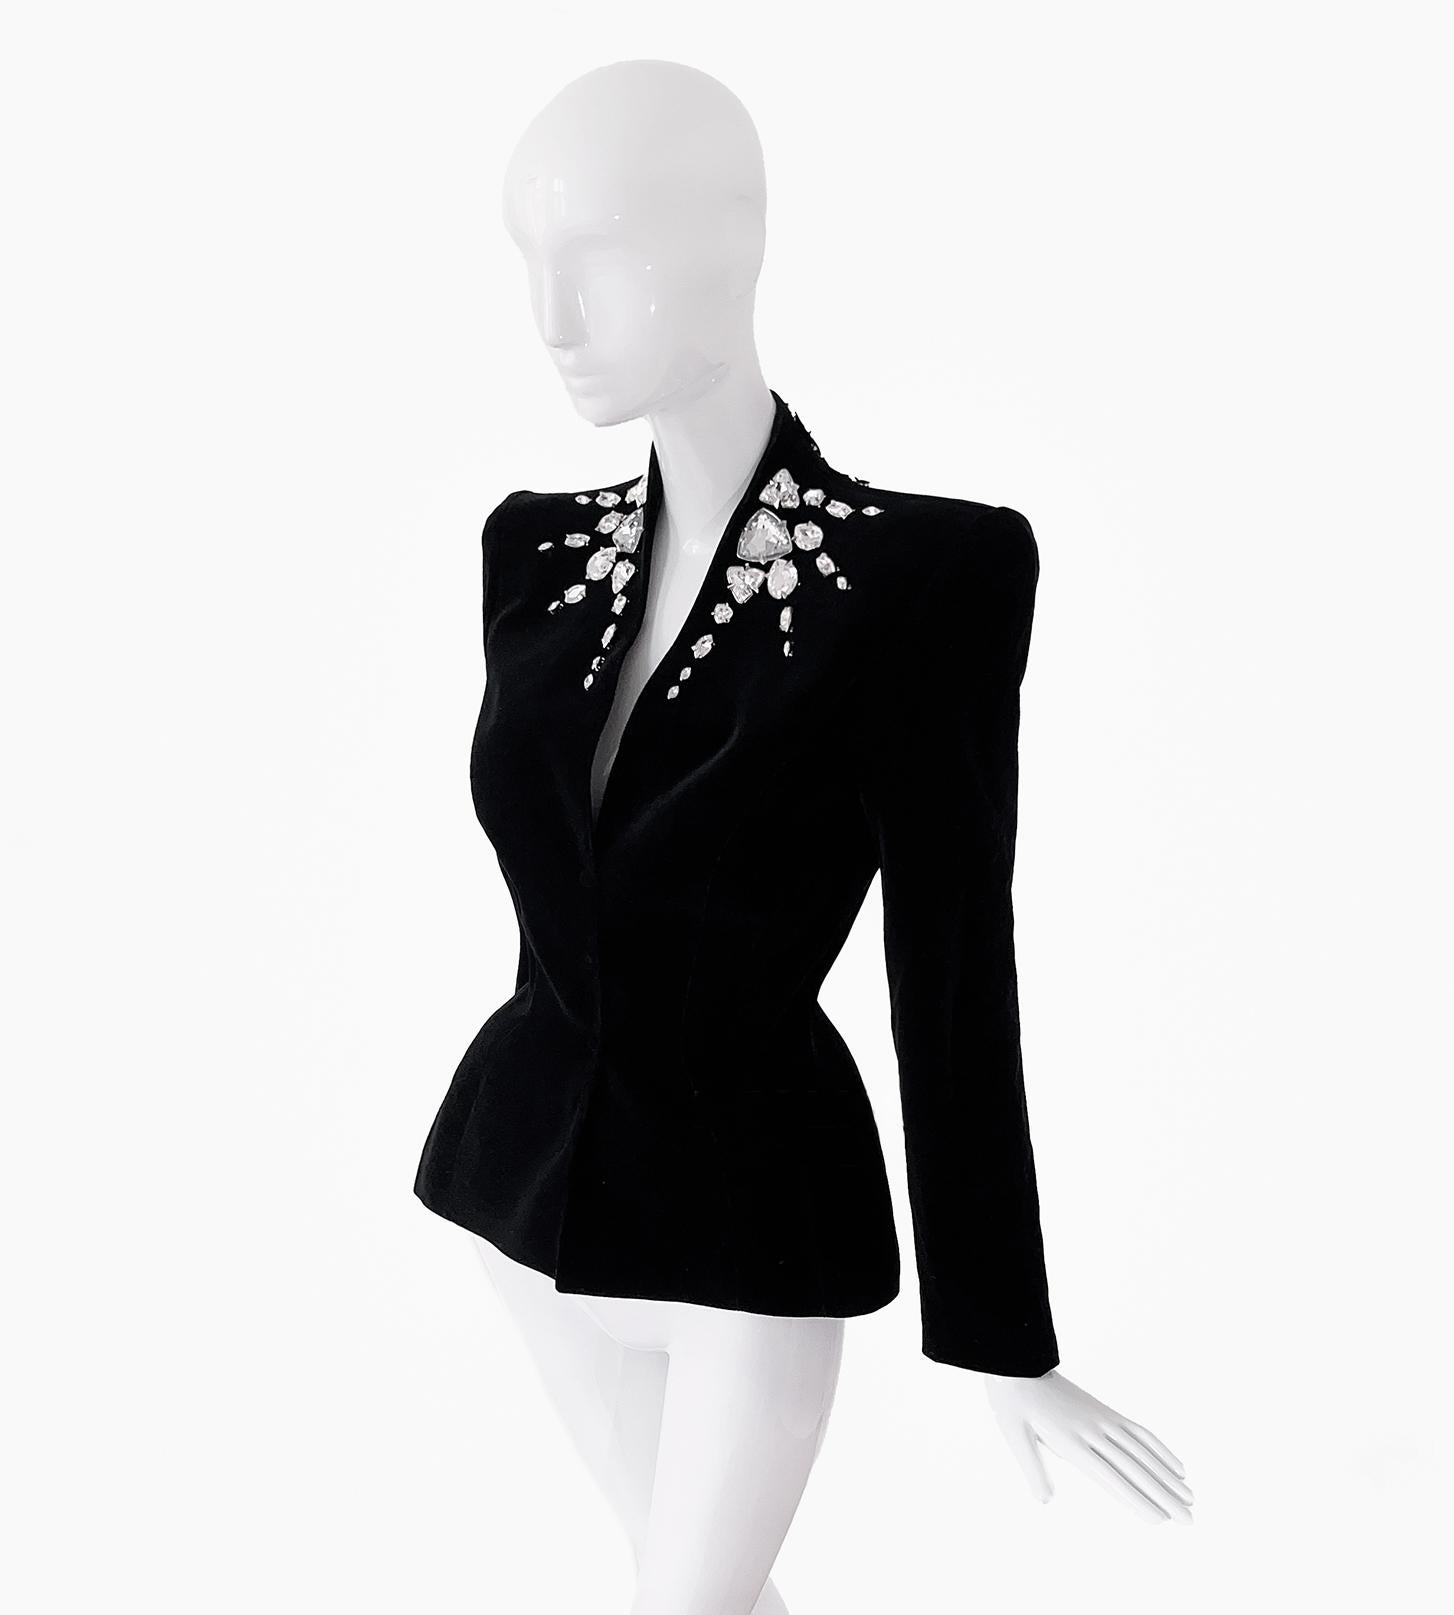 
The most amazing glamorous Thierry Mugler jacket. FW1985/86 Collection, Museum worthy collectors piece.
Unworn condition with original tag. Black high quality velvet with amazing big rhinestone crystal details. Strong shoulders and sculptural shape